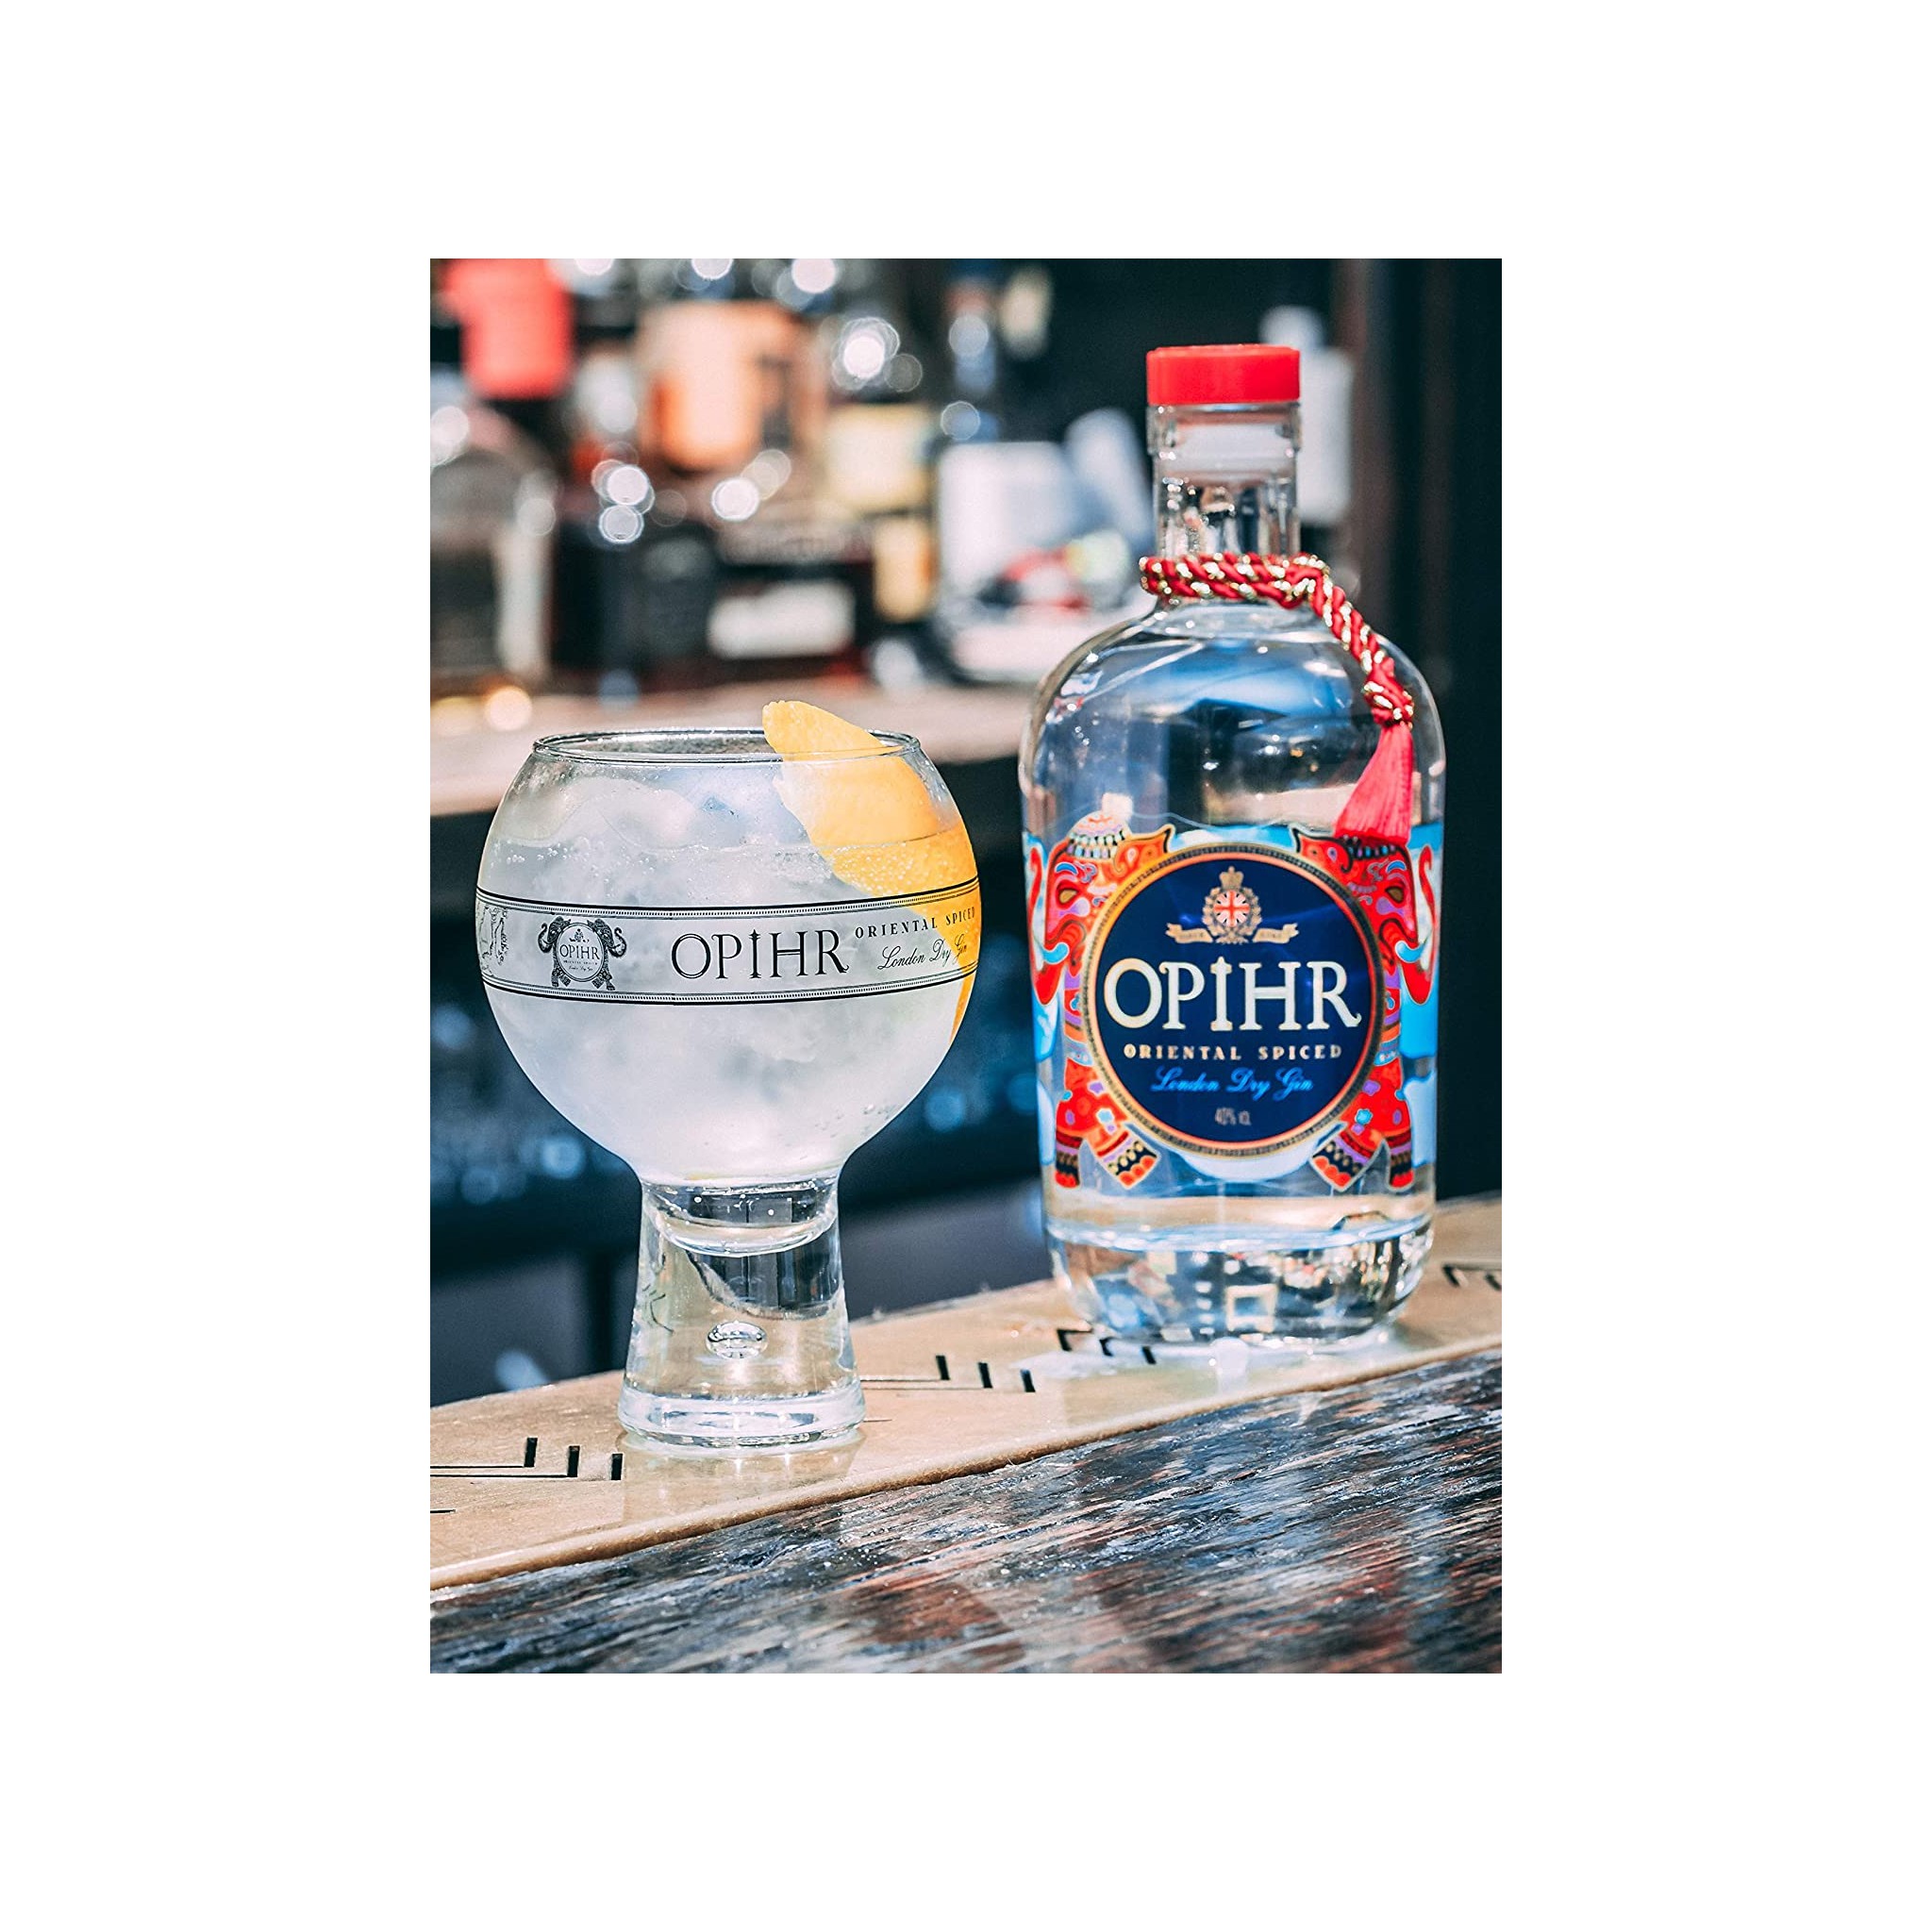 best sales Opihr gin. online Shop london Ophir Quality! Indian price Gin, and botanical Gin. Online dry